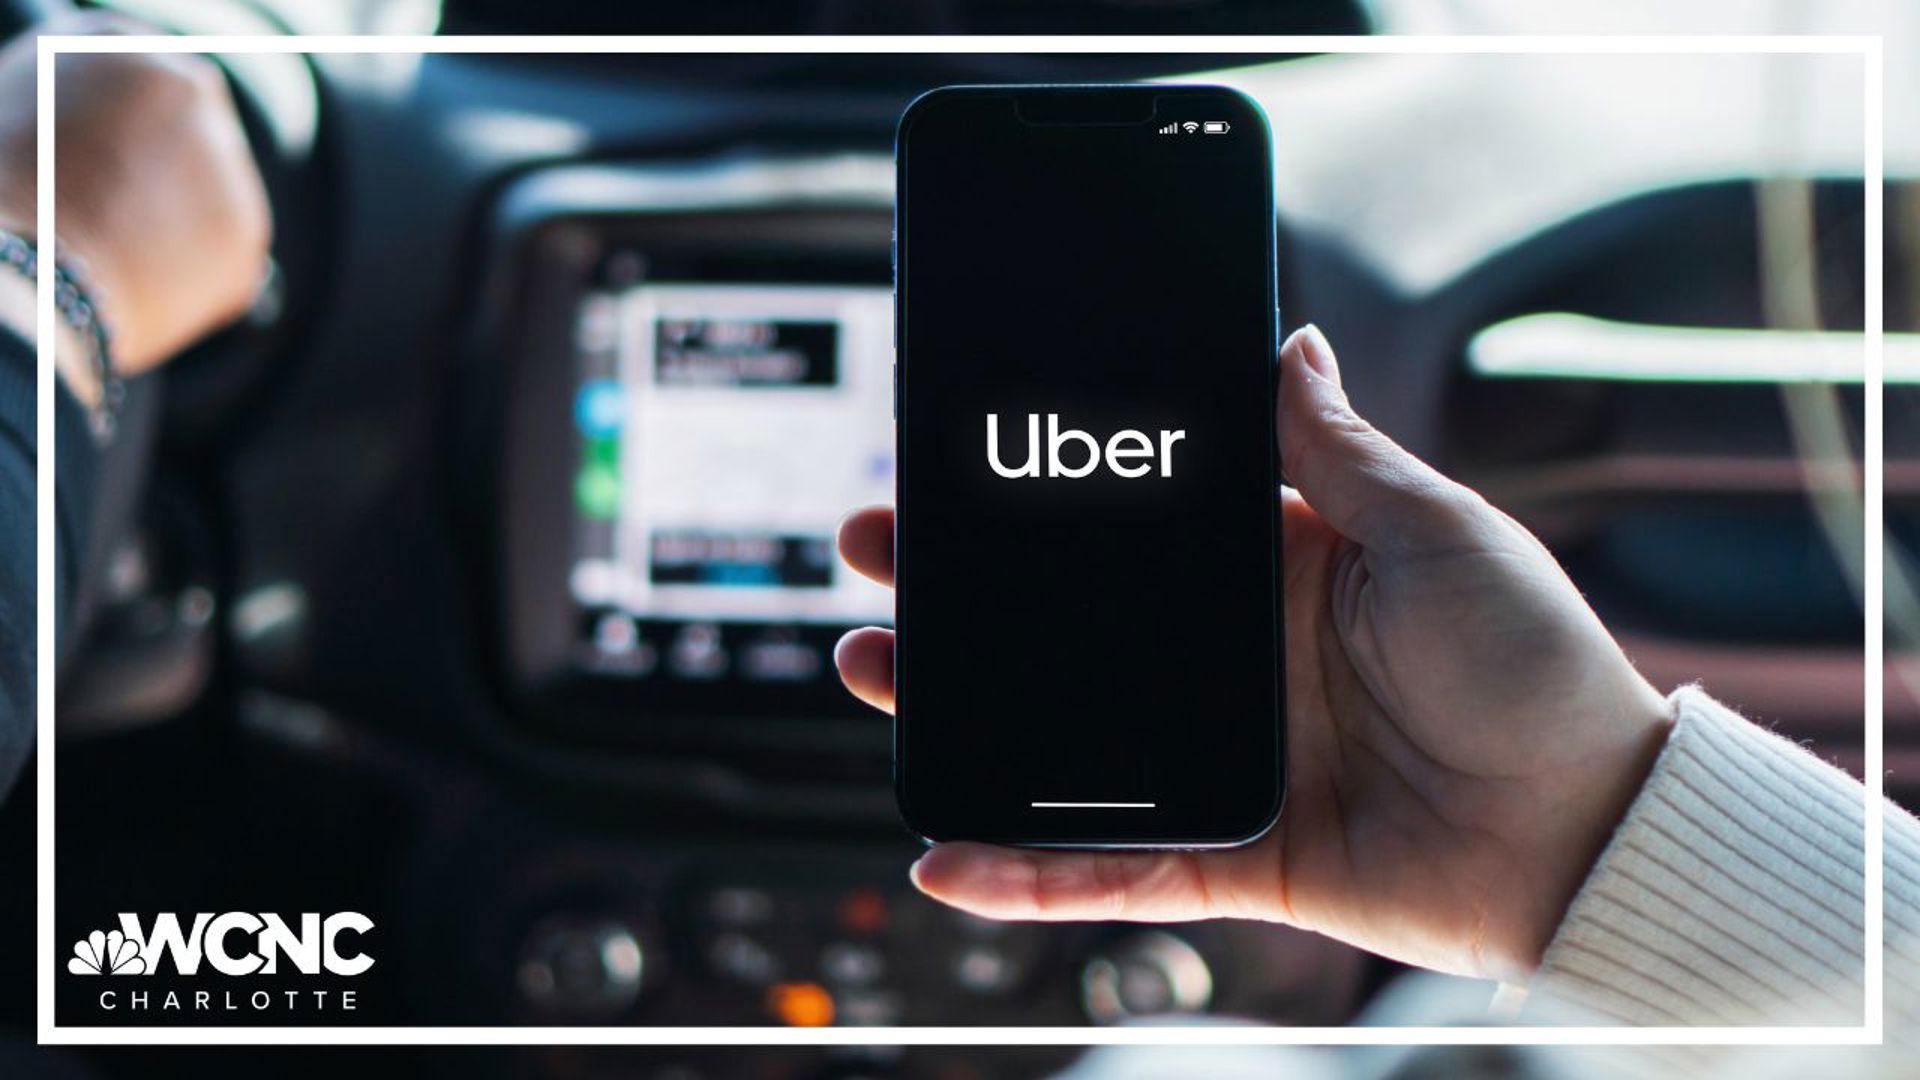 A new feature is coming to Uber in the Carolinas. The company's new shuttle services will be for customers looking to save money through group rides.